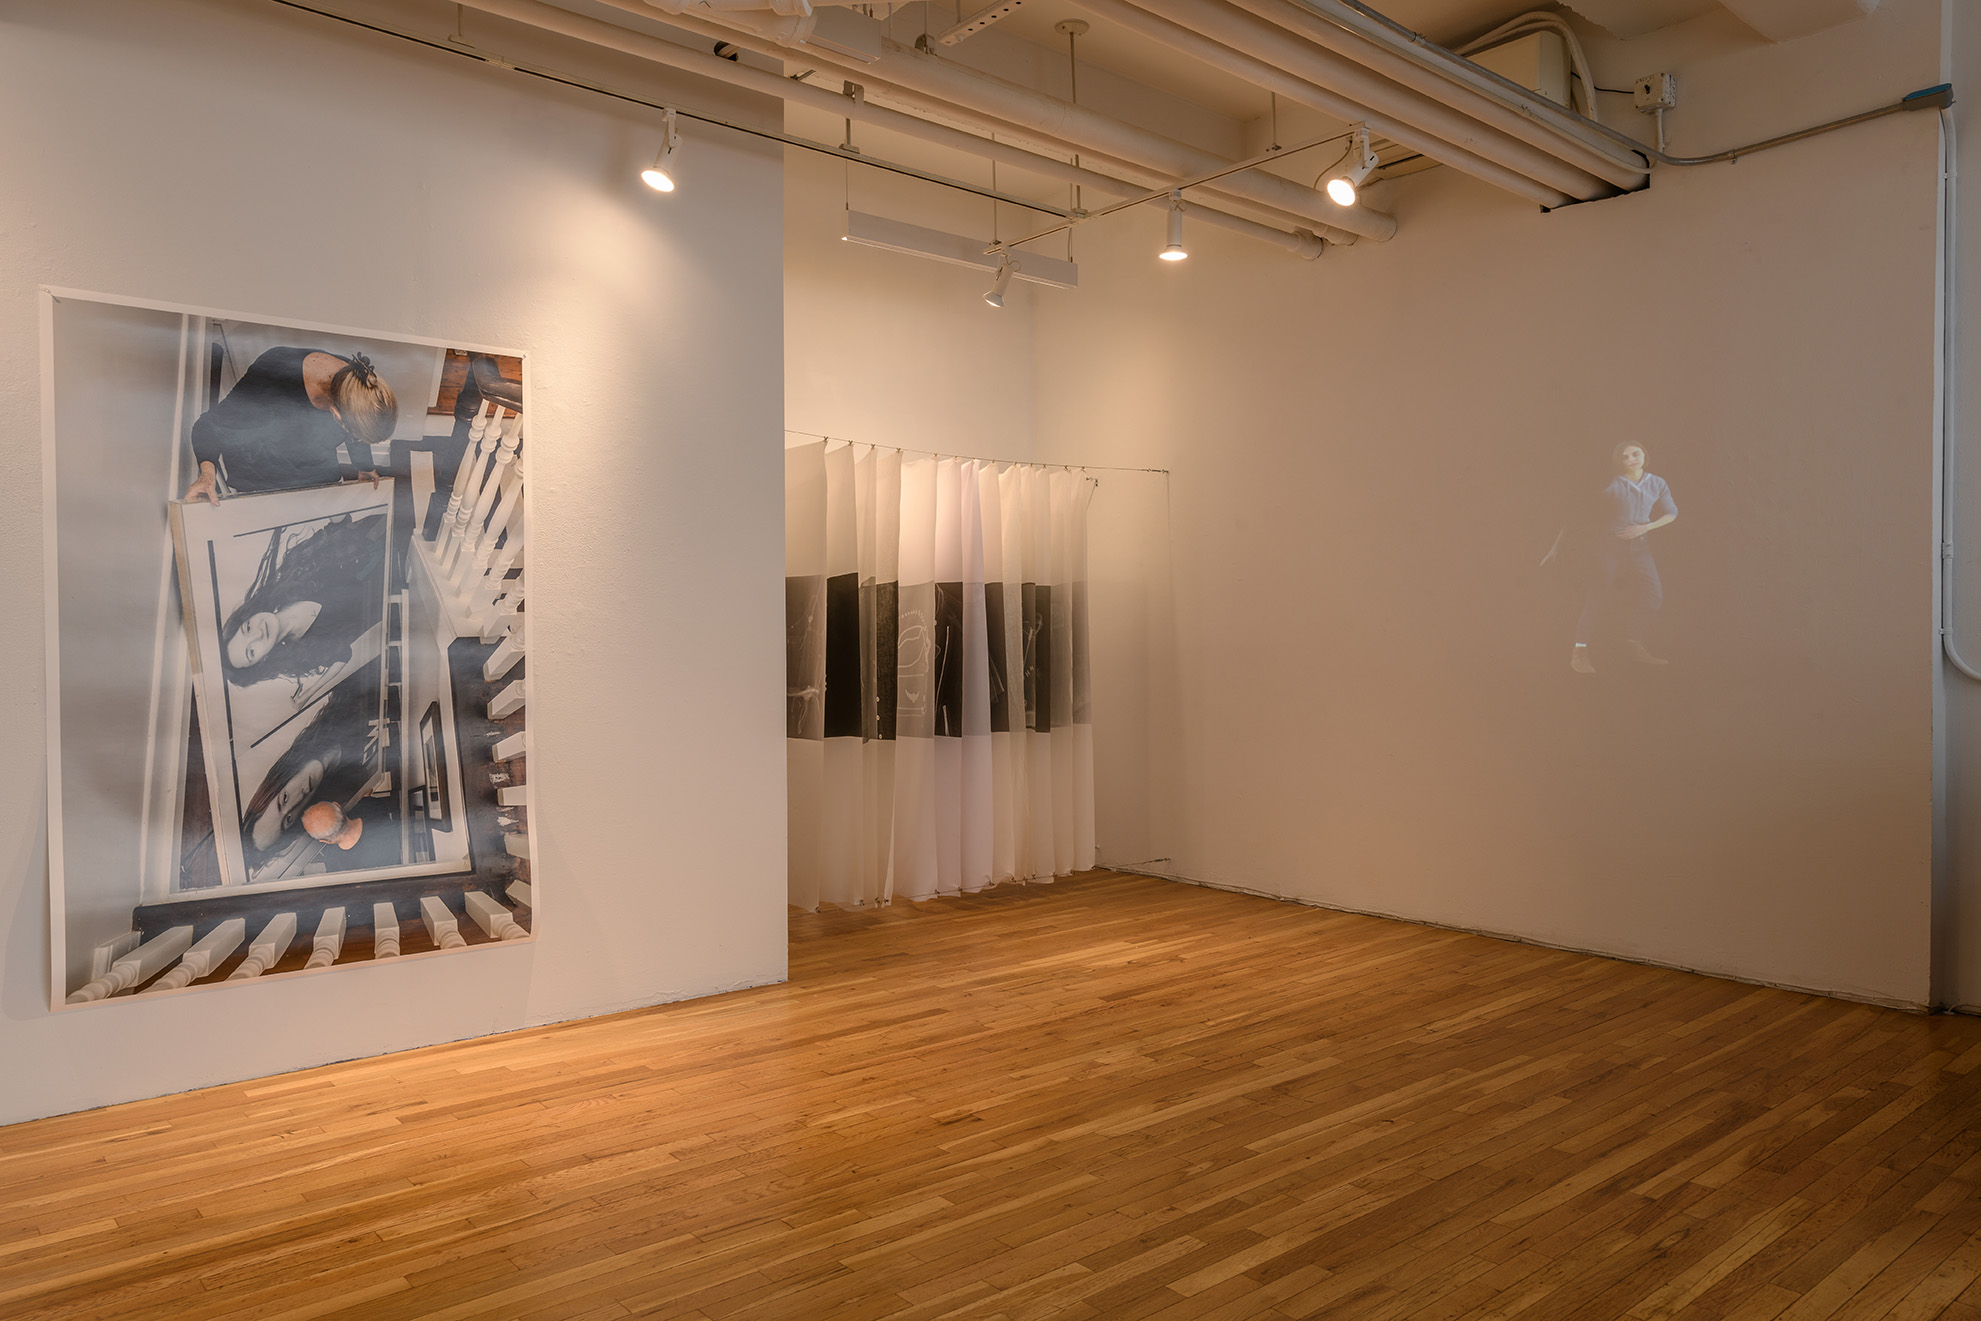 [Another view of the large open gallery facing more directly the large wall-hung unframed color photograph. To the right of the photograph is a sculpture made of sheets of diaphanous fabrics of various opacities. Turning the corner from the fabric sculpture, a faintly-seen moving image is projected onto a white wall.]